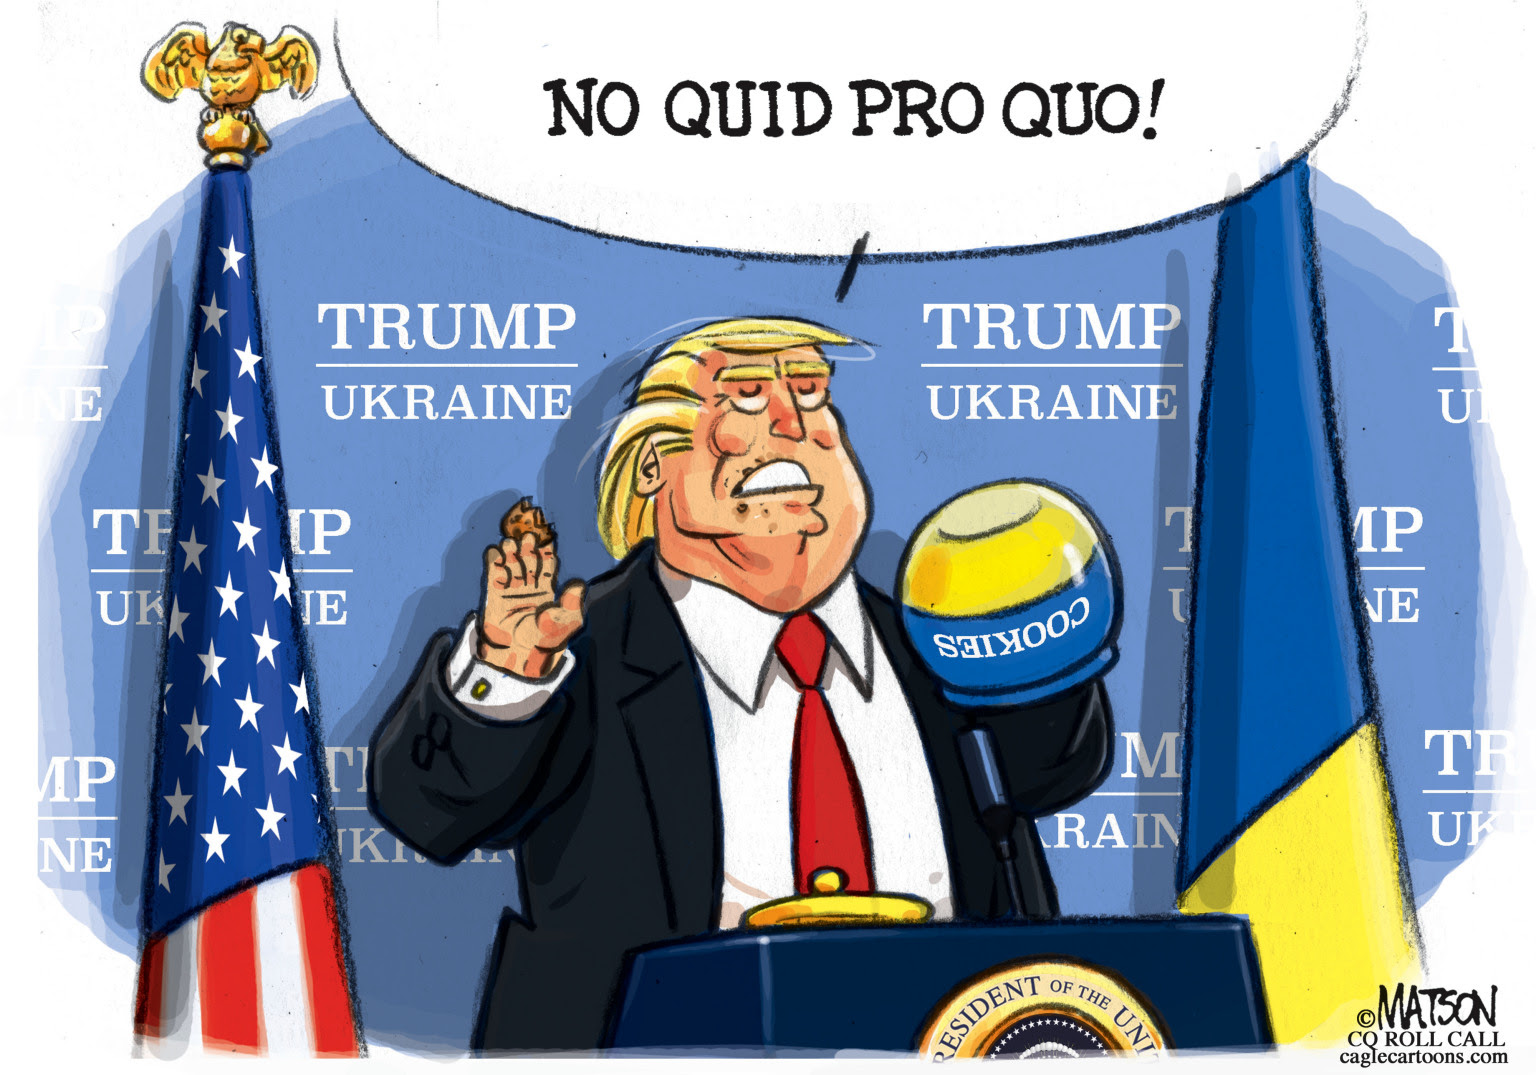 Trump denies weapons from Ukraine unless they help him get re-elected.